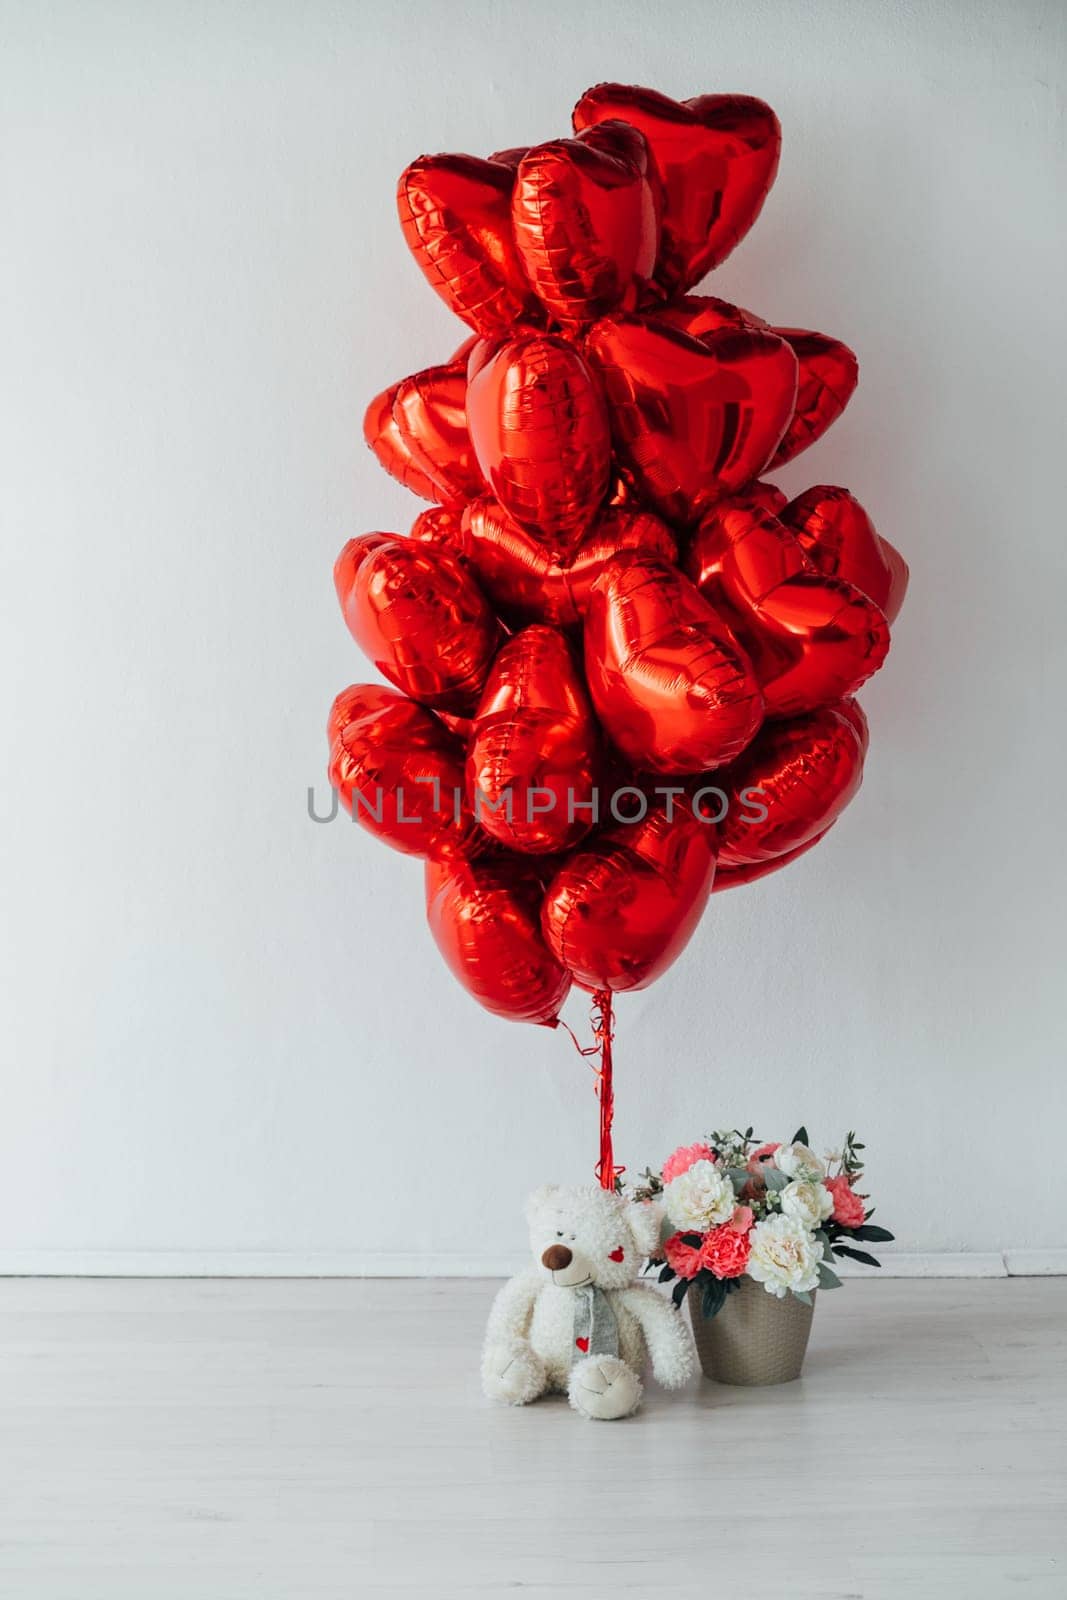 red balloons heart shaped valentine's day toy flowers by Simakov